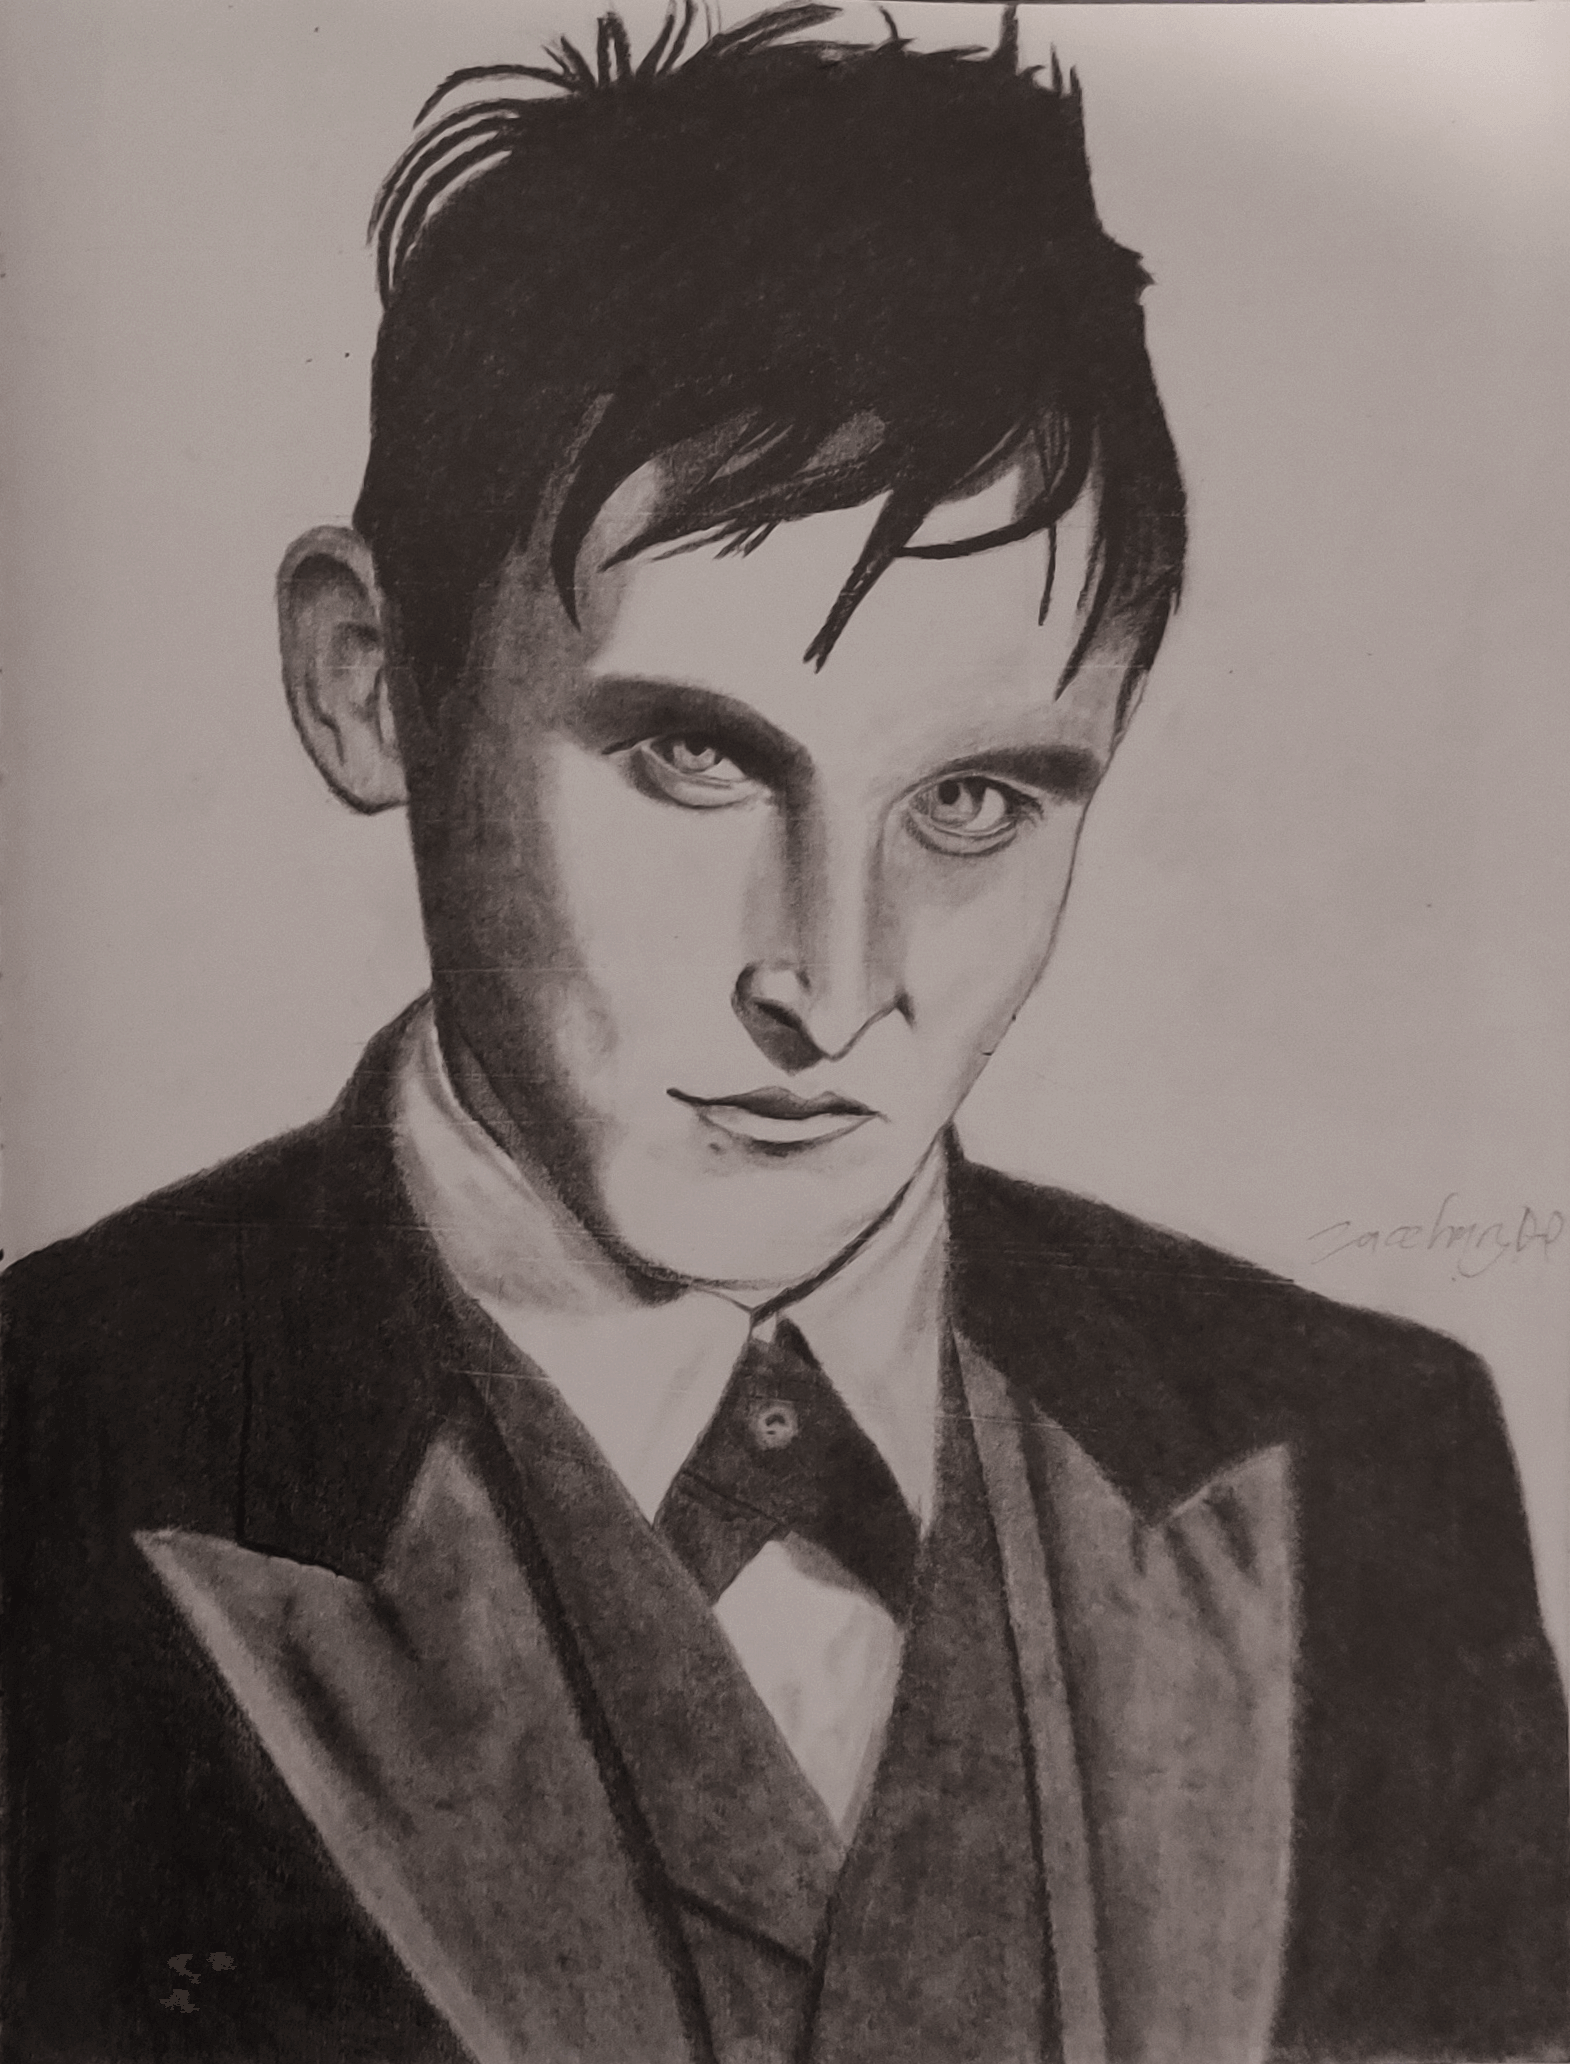 A pencil portrait of Penguin from the TV show ‘Gotham’.